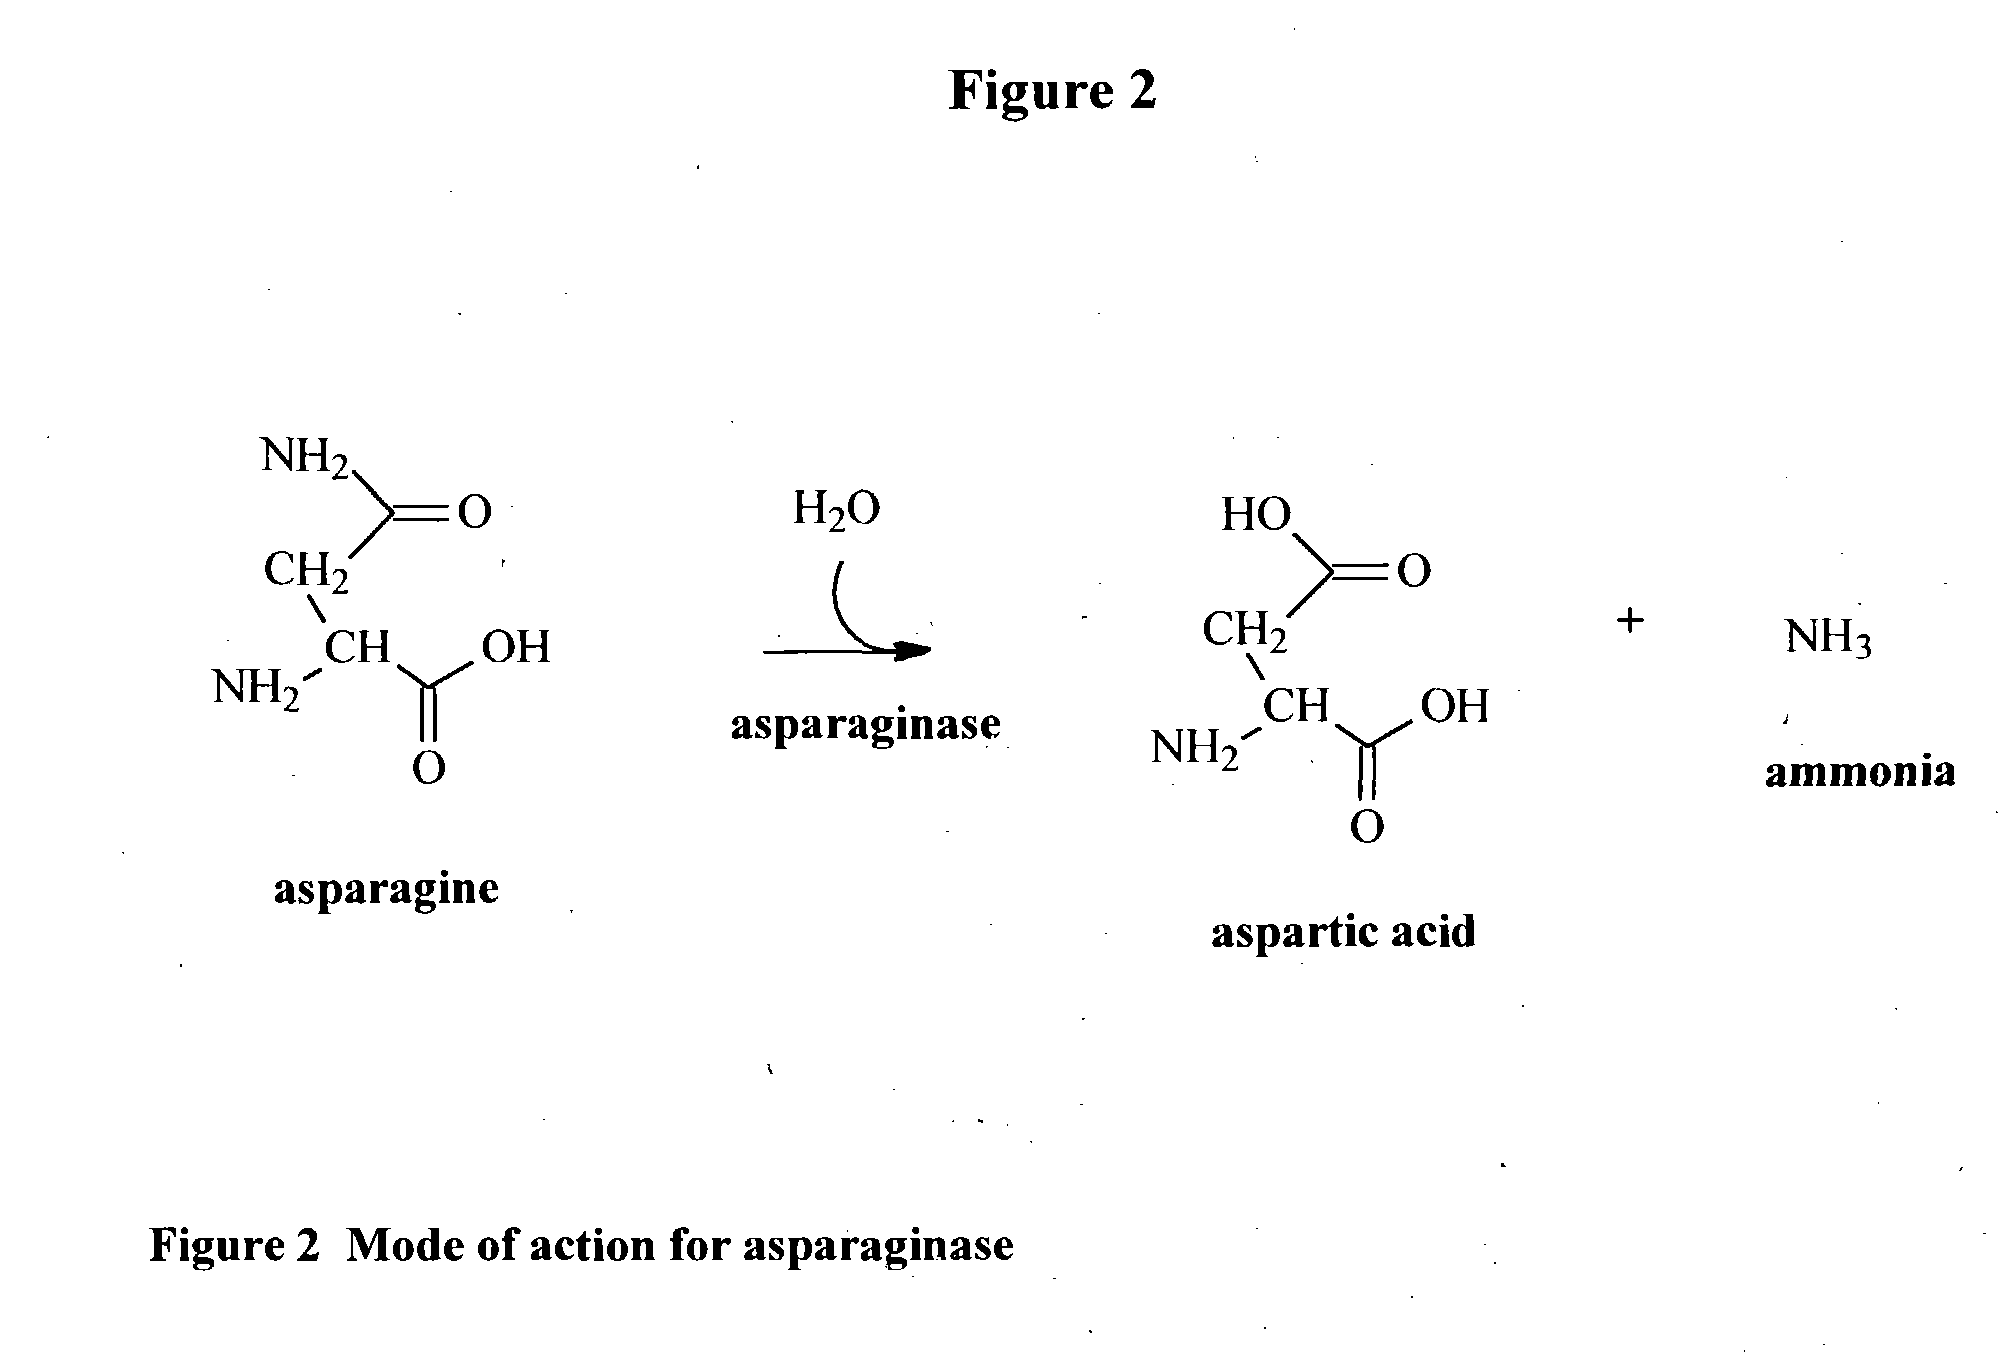 Method for reduction of acrylamide in cocoa products, cocoa products having reduced levels reduced levels of acrylamide, and article of commerce